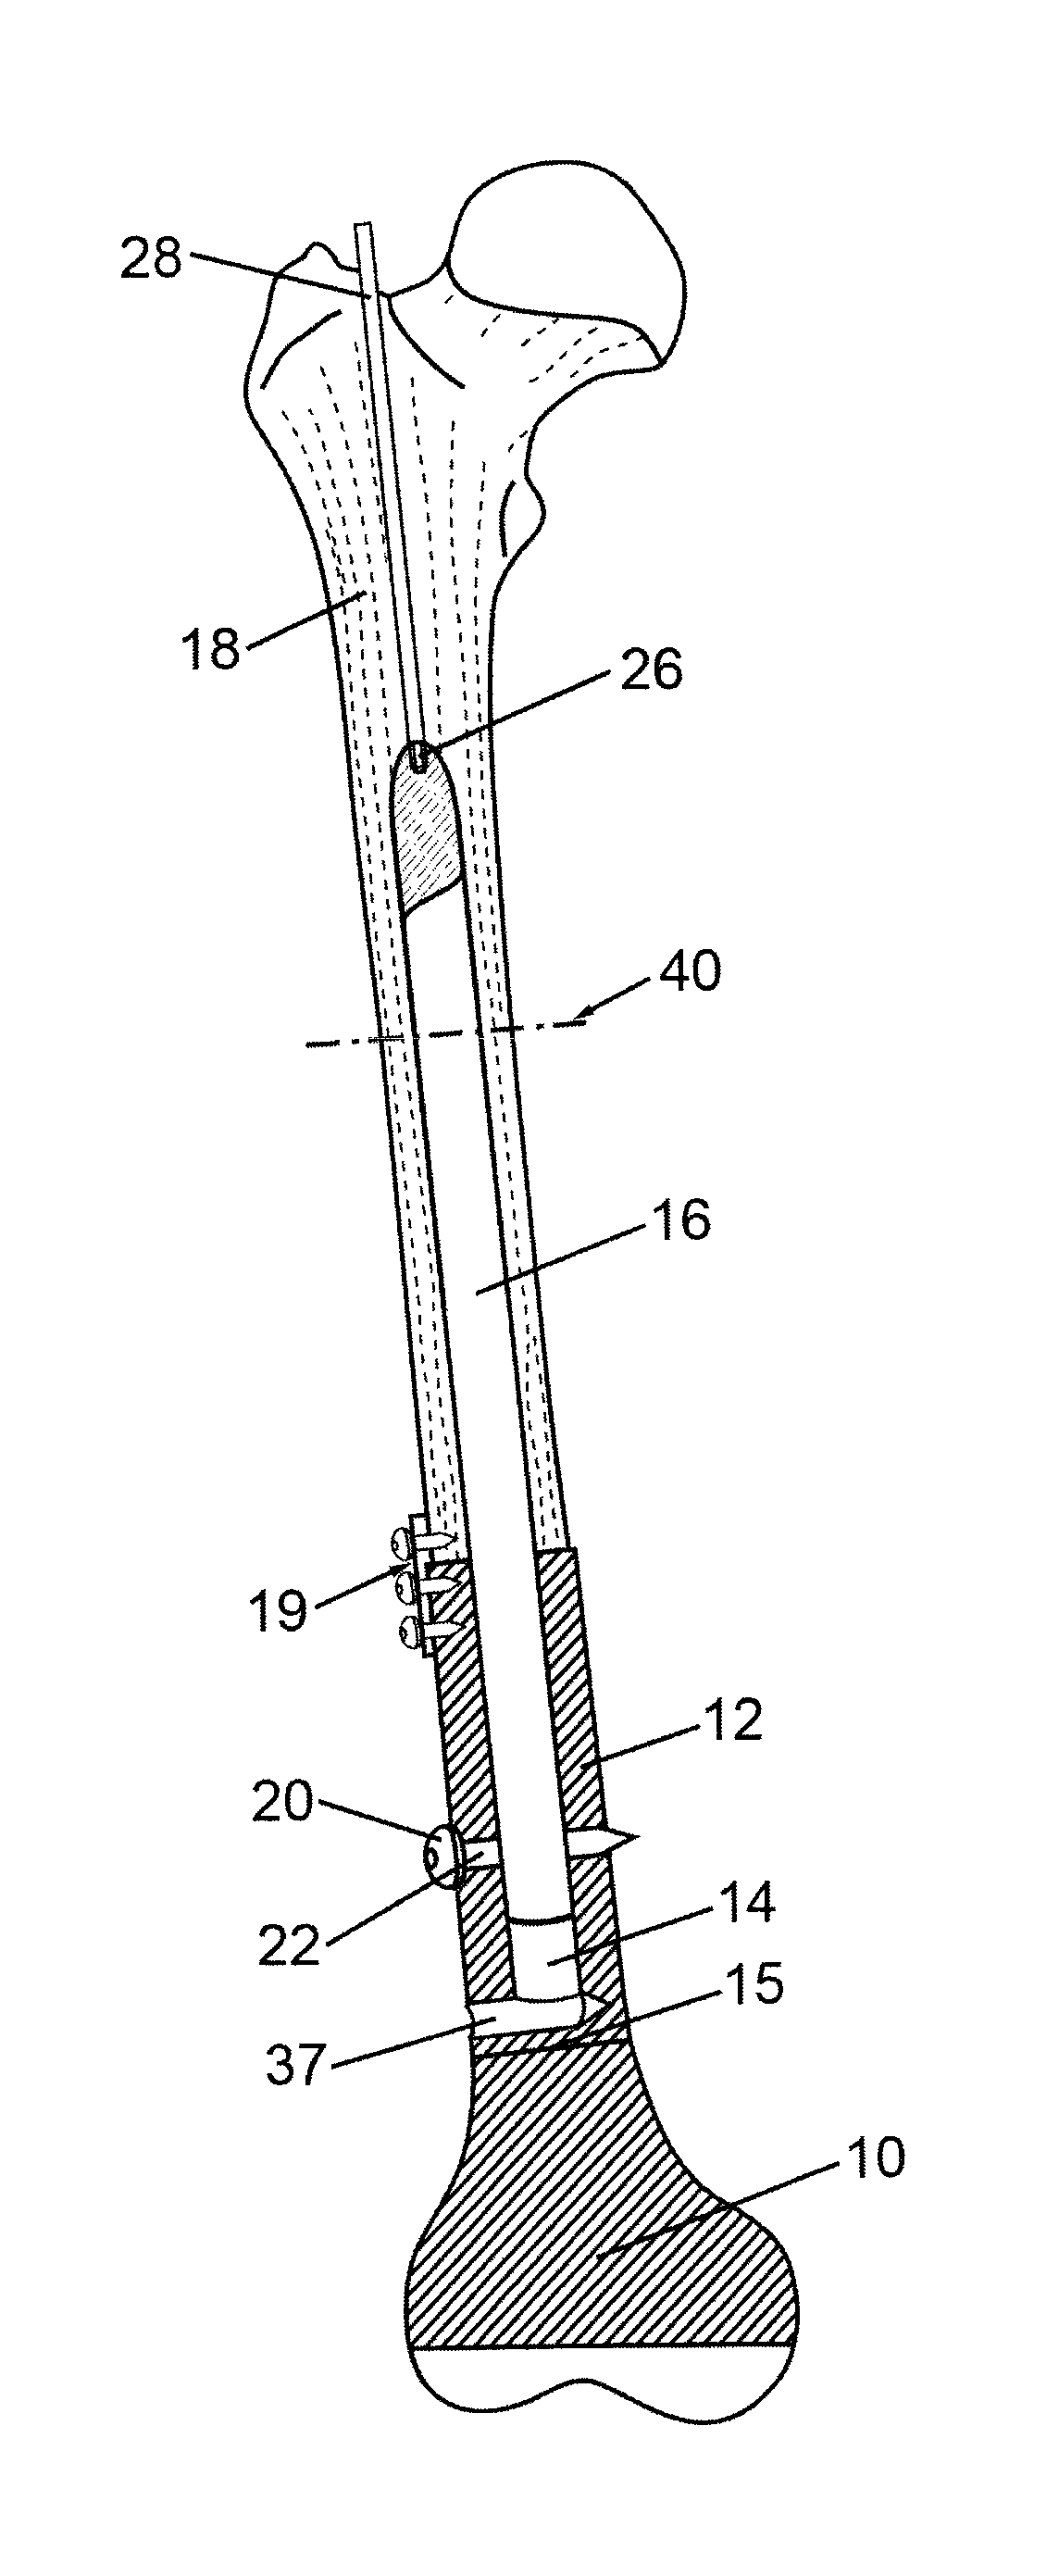 Implantable prosthesis for replacing a human hip or knee joint and the adjoining bone sections